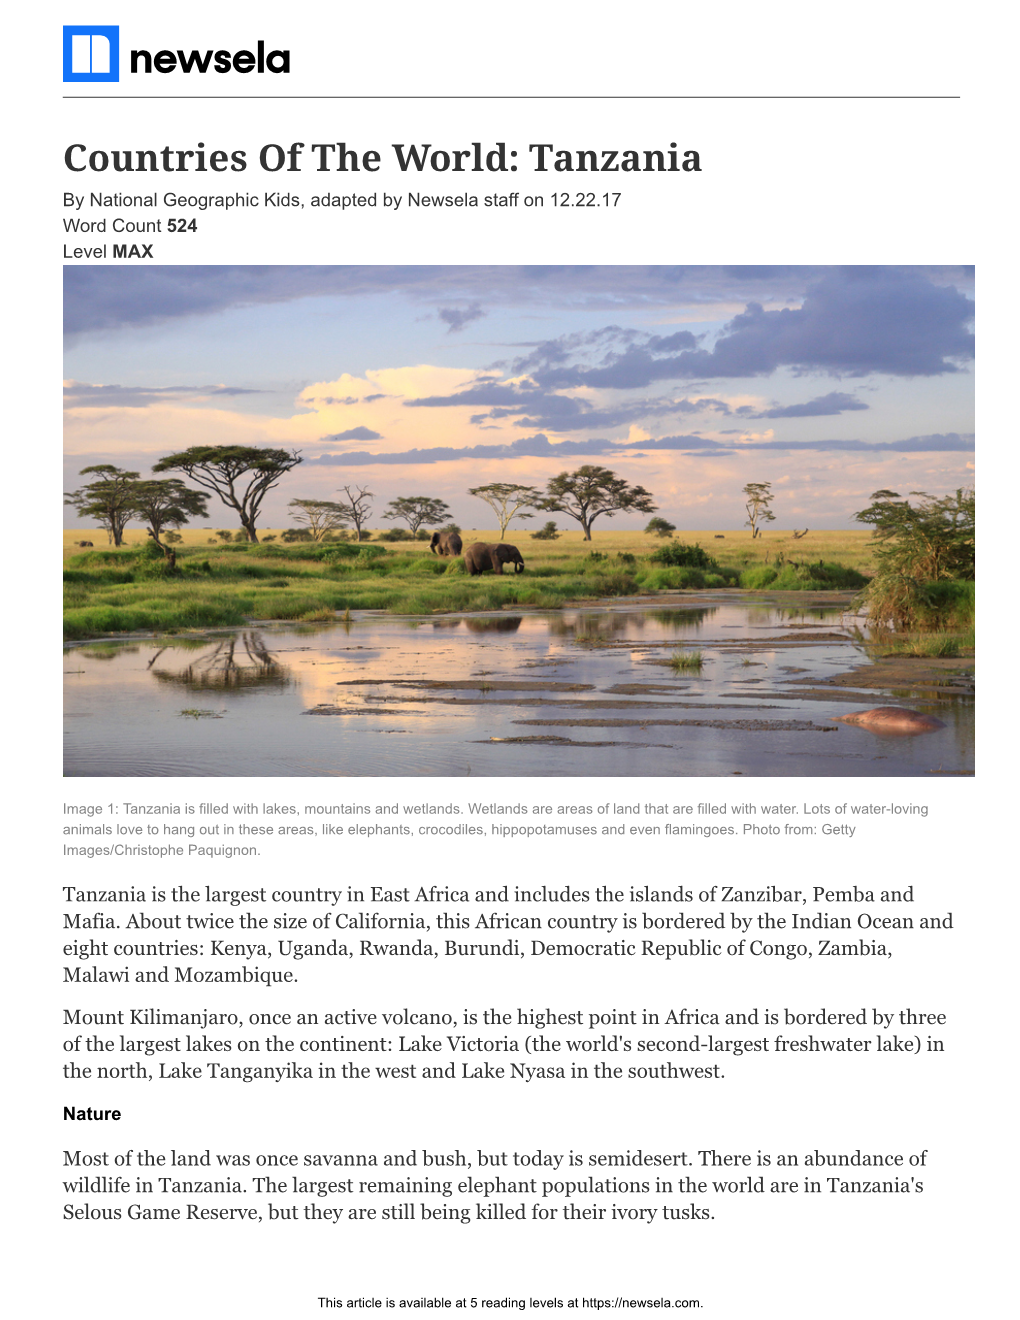 Countries of the World: Tanzania by National Geographic Kids, Adapted by Newsela Staff on 12.22.17 Word Count 524 Level MAX